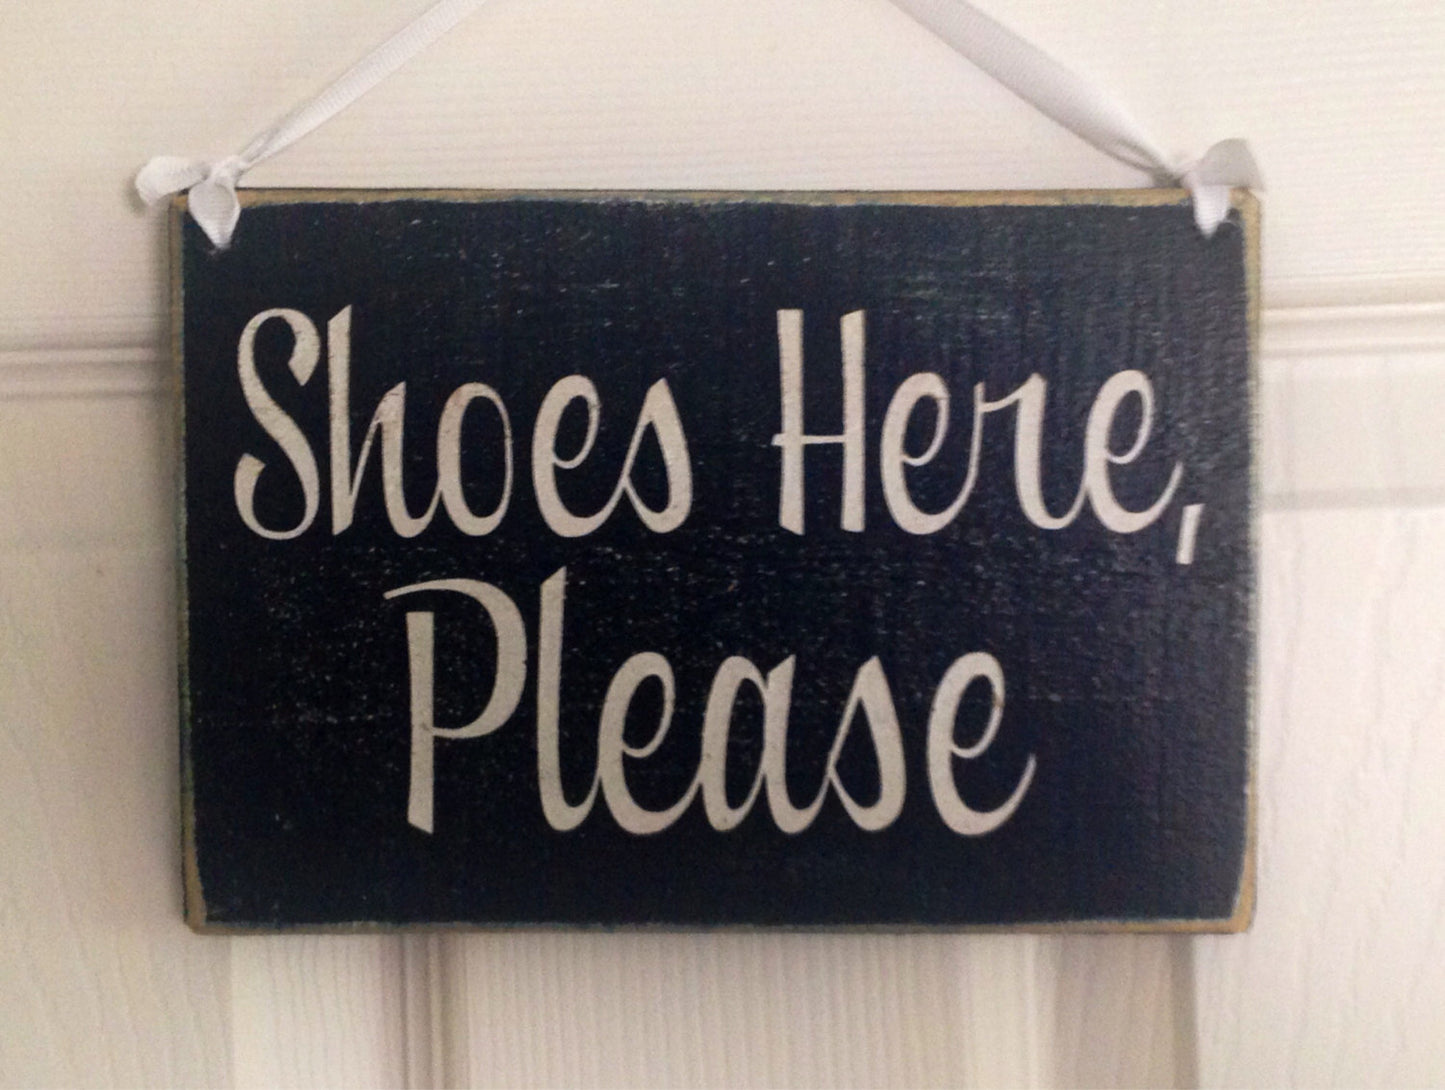 8x6 Shoes Here Please Custom Wood Sign Remove Your Shoes Bare Your Soles Welcome Plaque